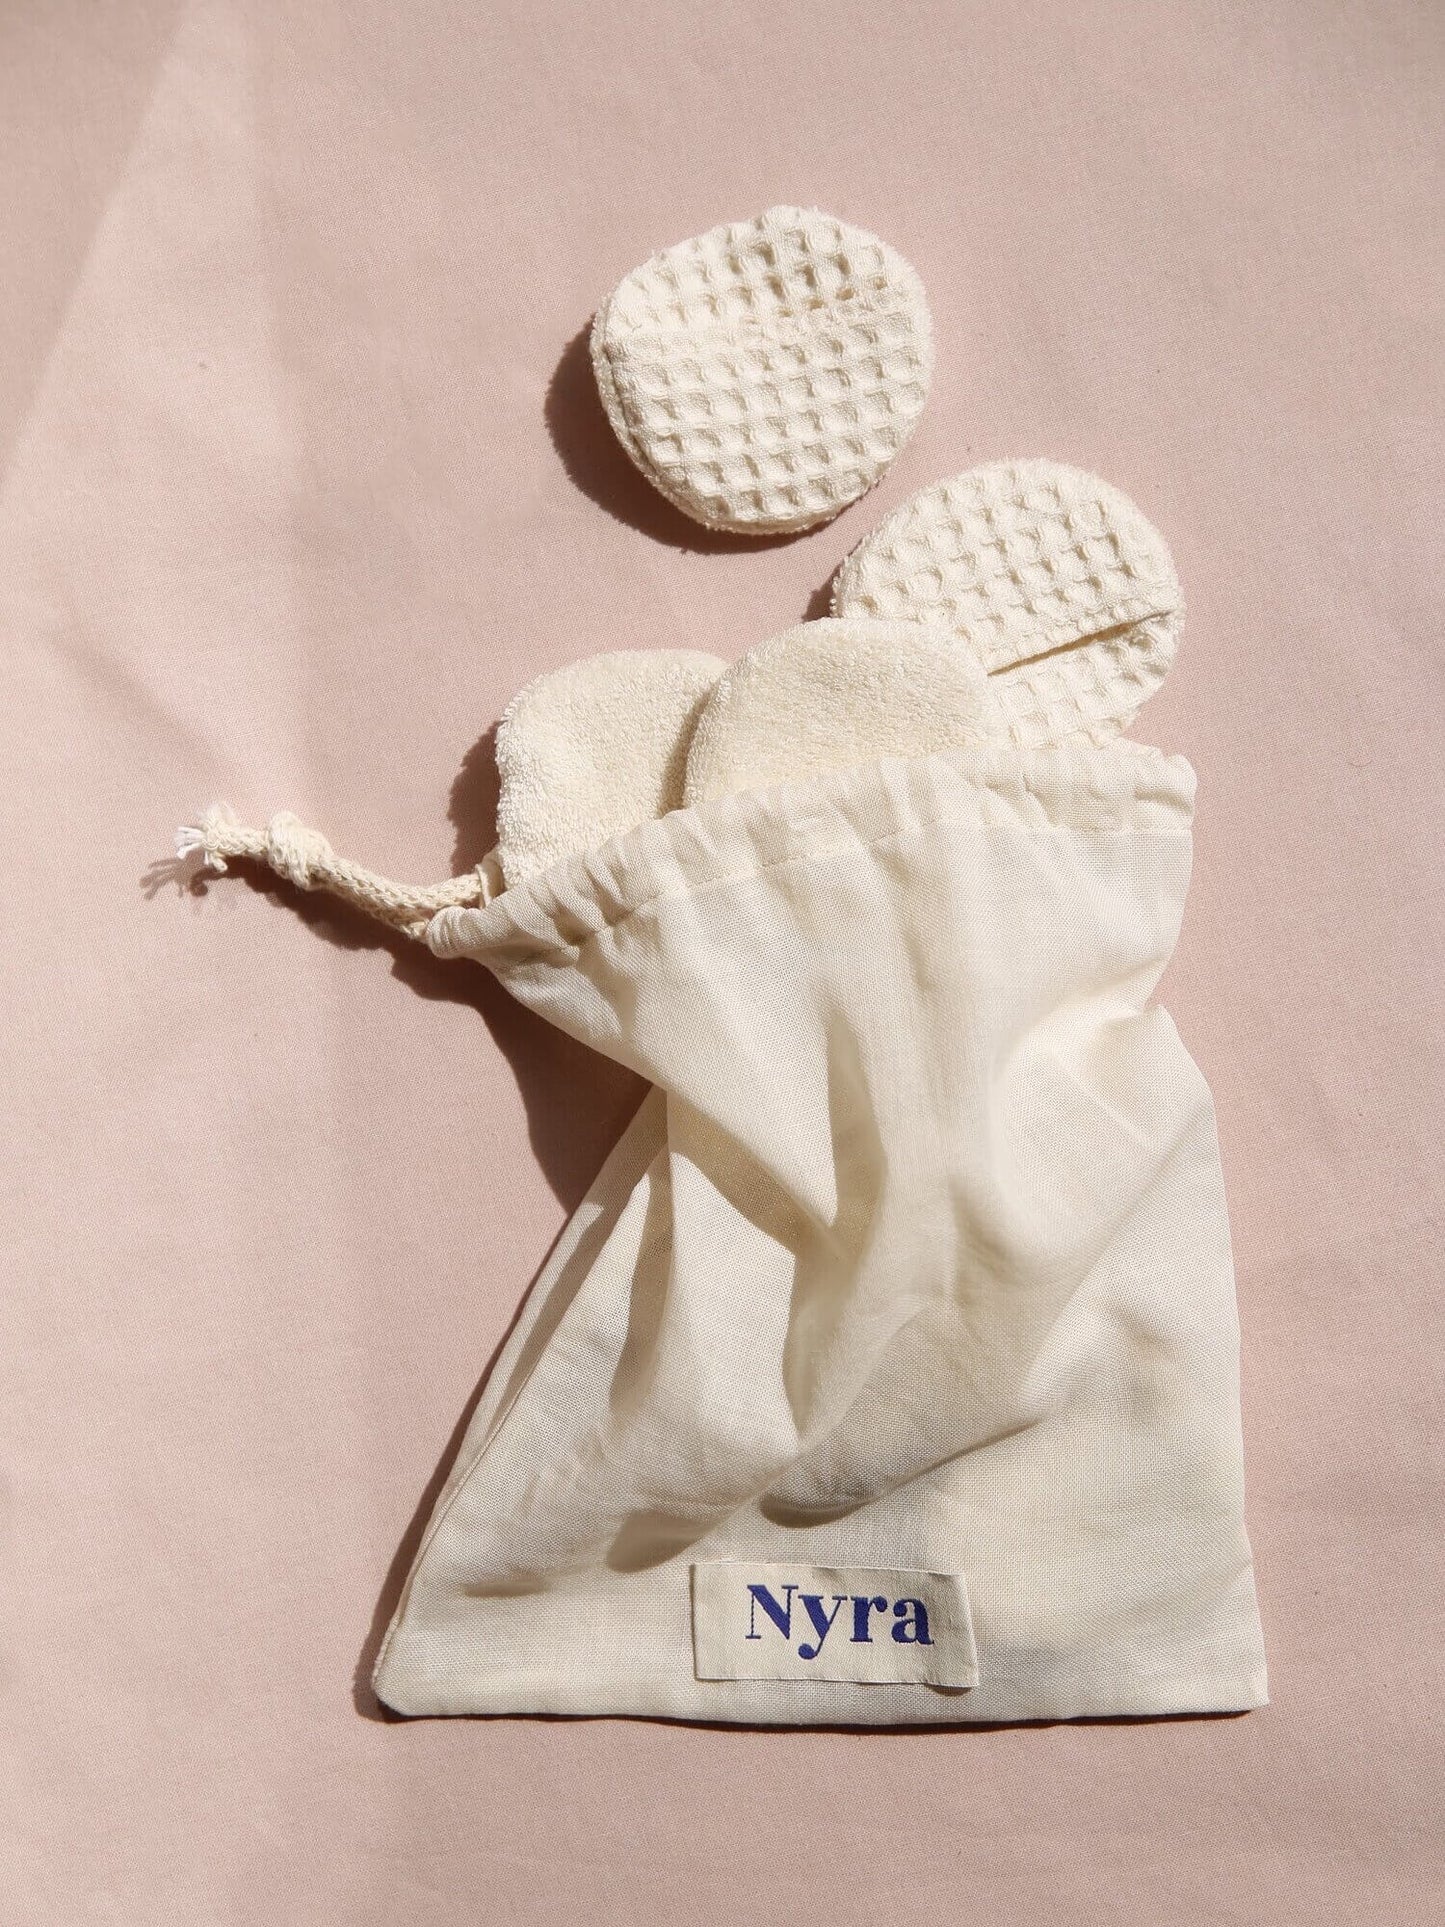 Reusable Eco Cotton Cosmetic Pads